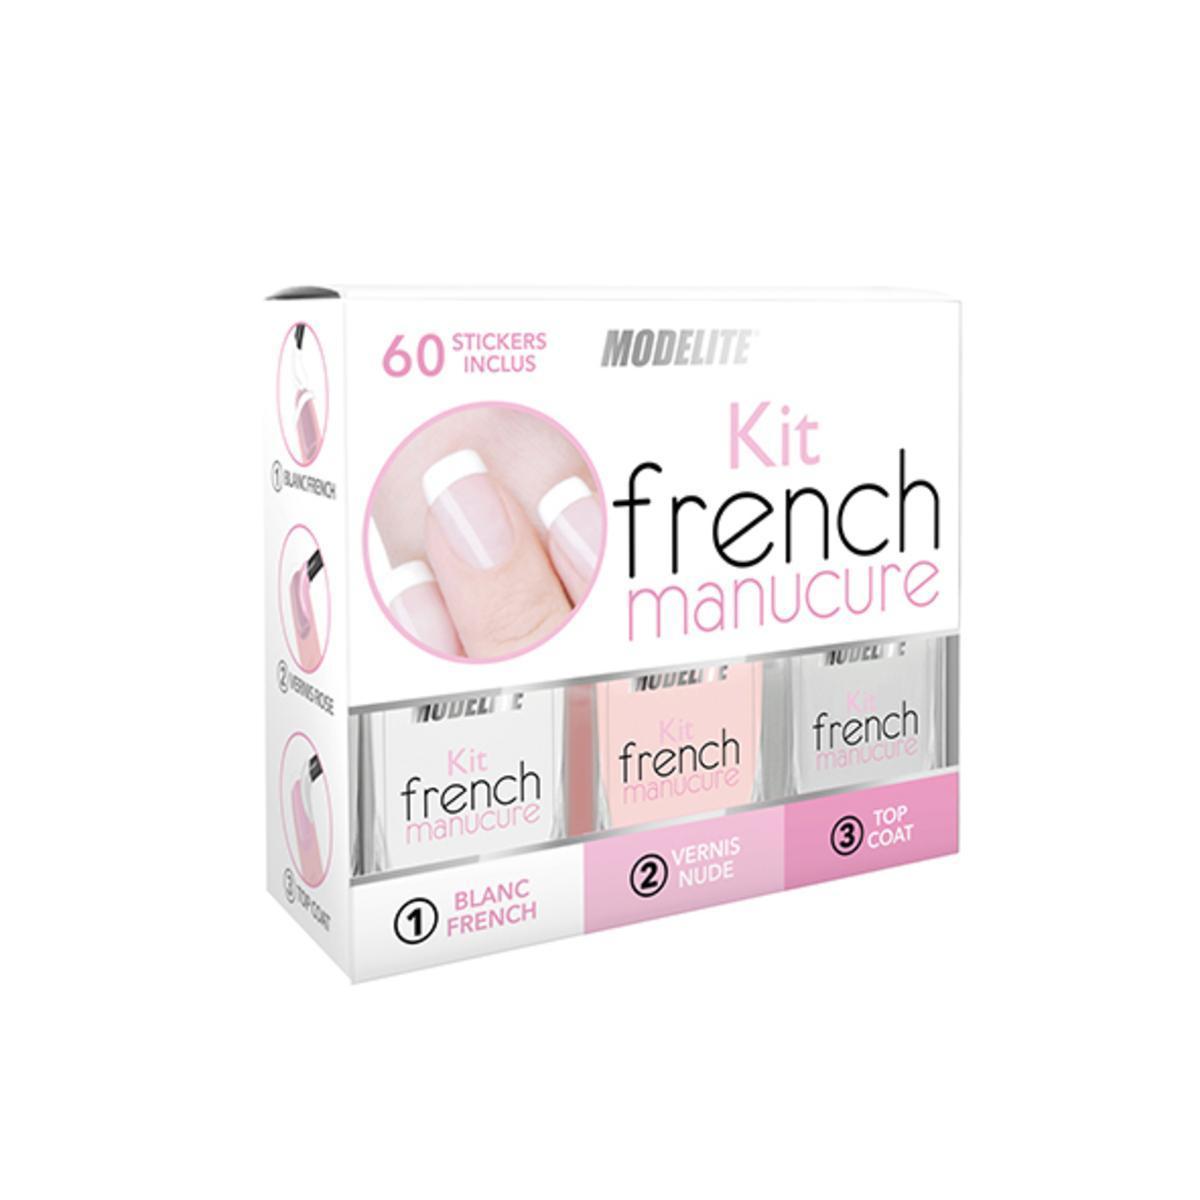 Kit french manucure